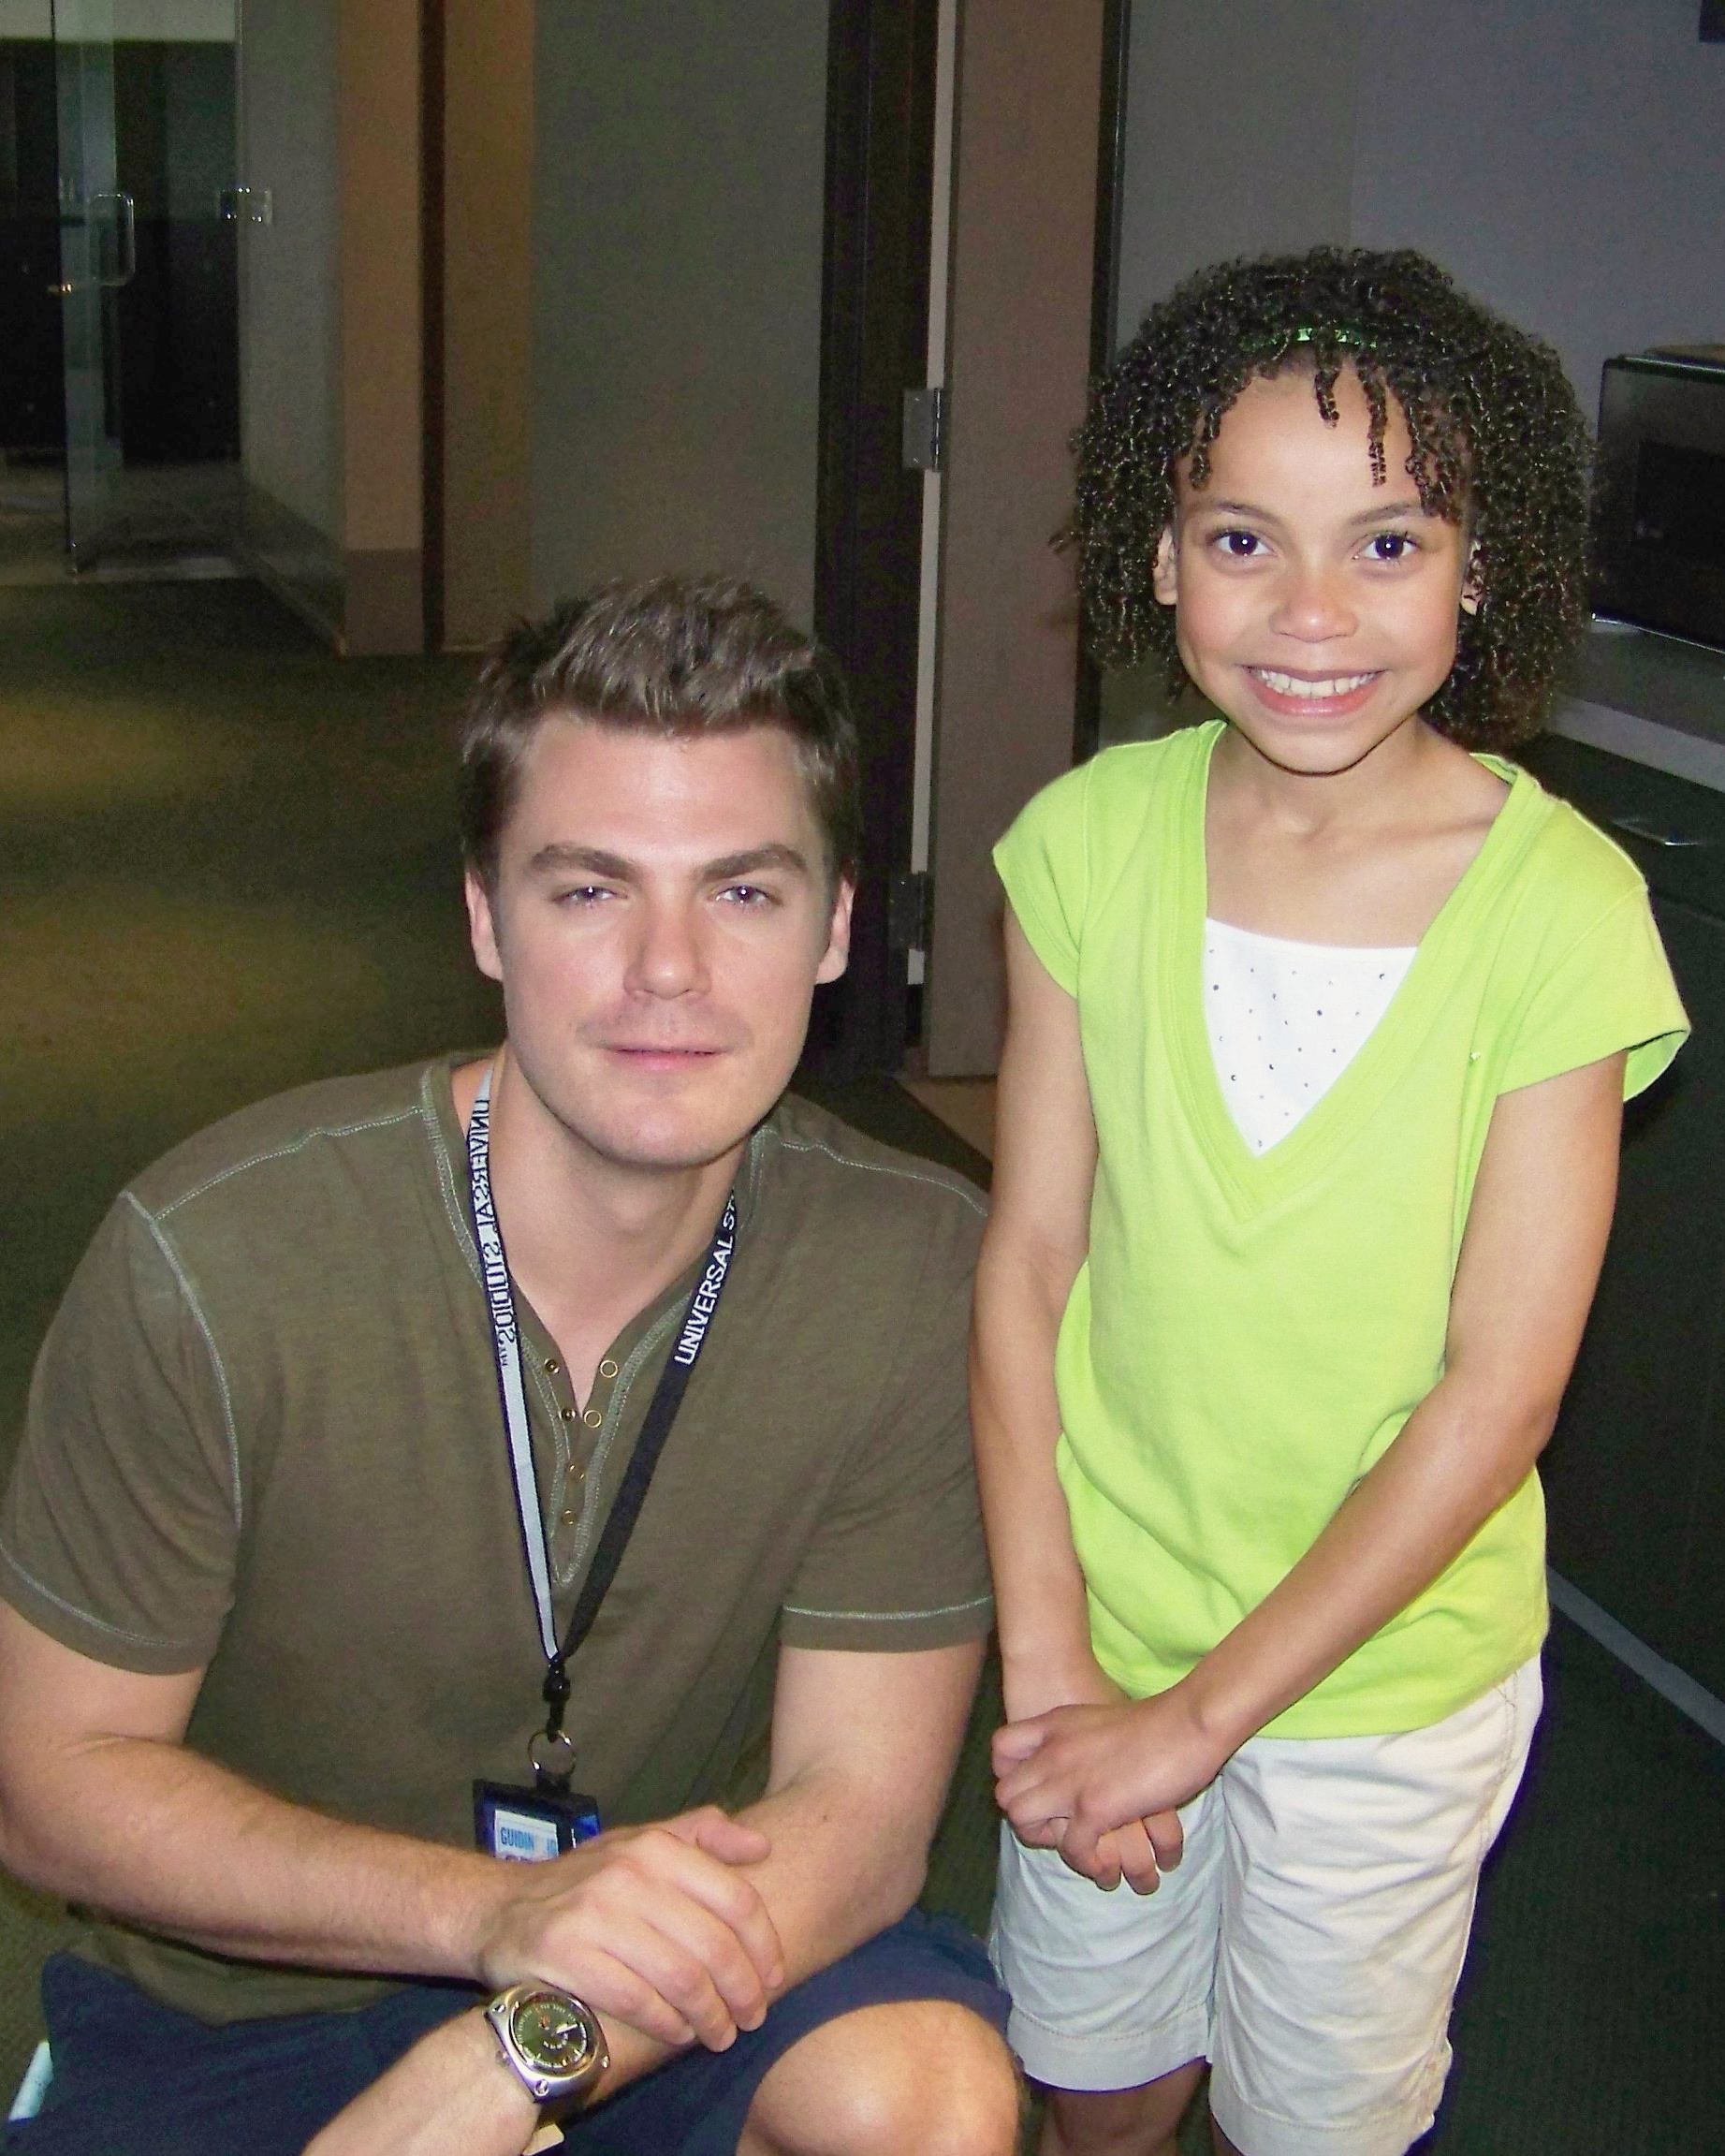 Kayla with actor Jeff Branson, he plays Shayne Lewis on Guiding Light. Kayla was filming on set of Guiding Light on April 09 at Universal City Walk.